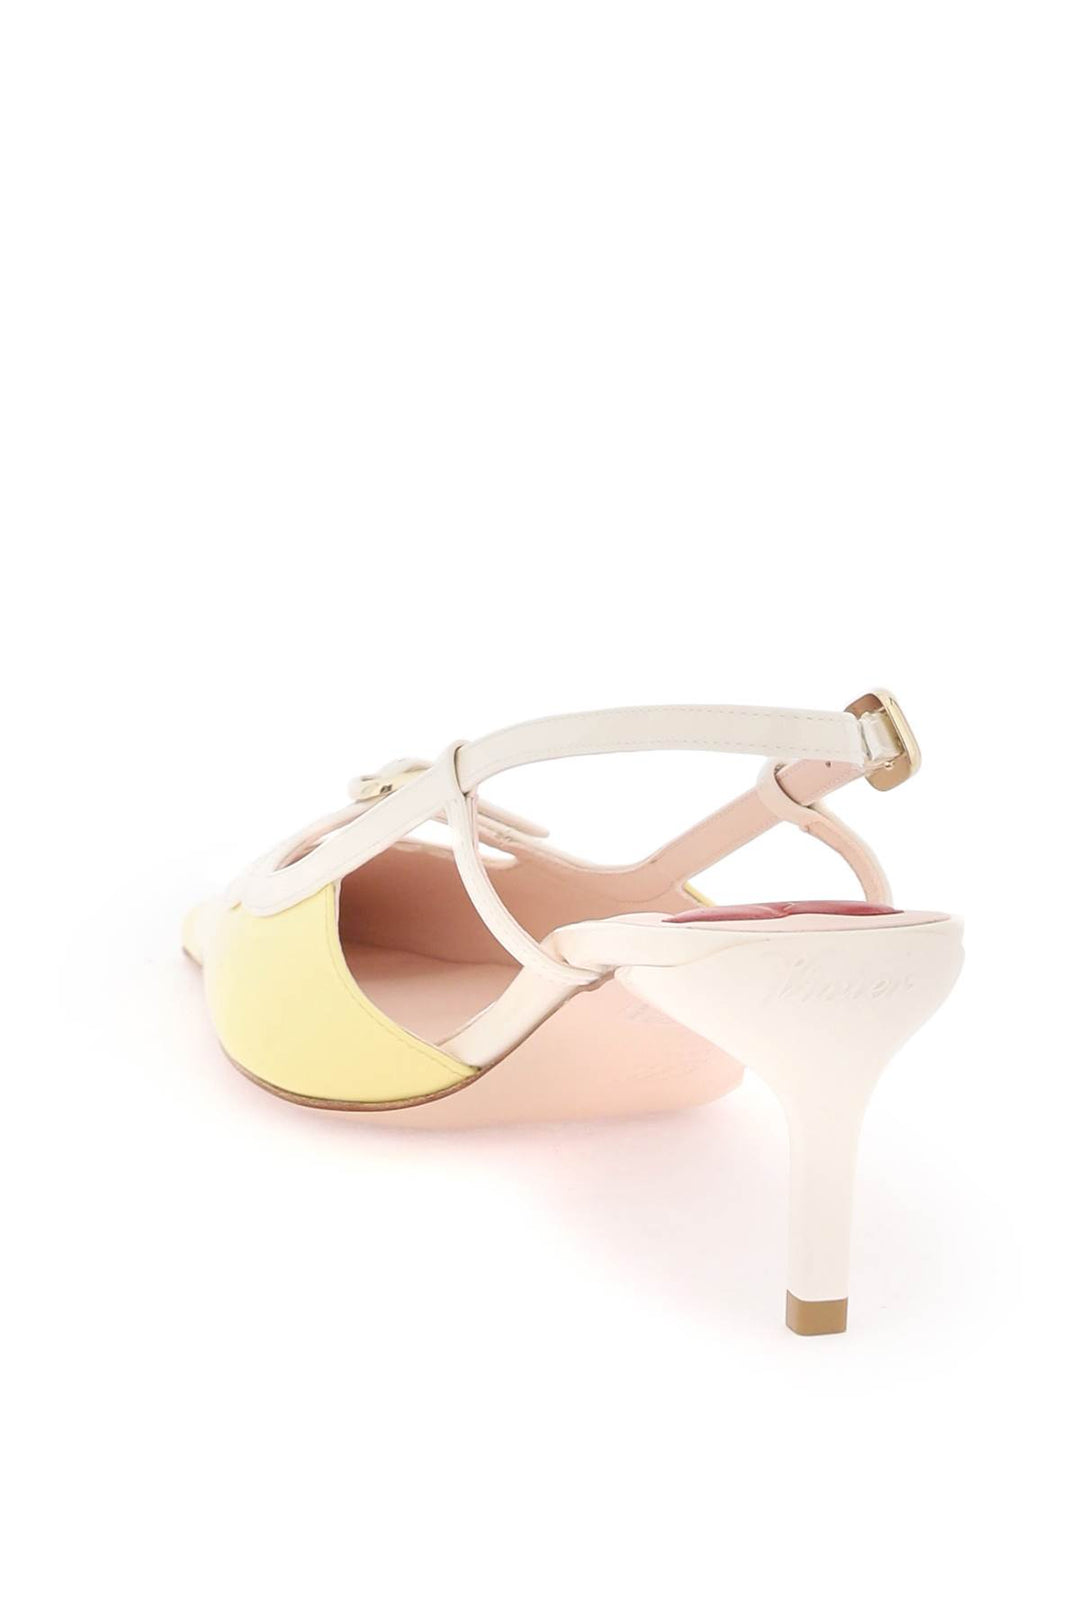 Roger Vivier Two Tone Patent Leather Pumps   White